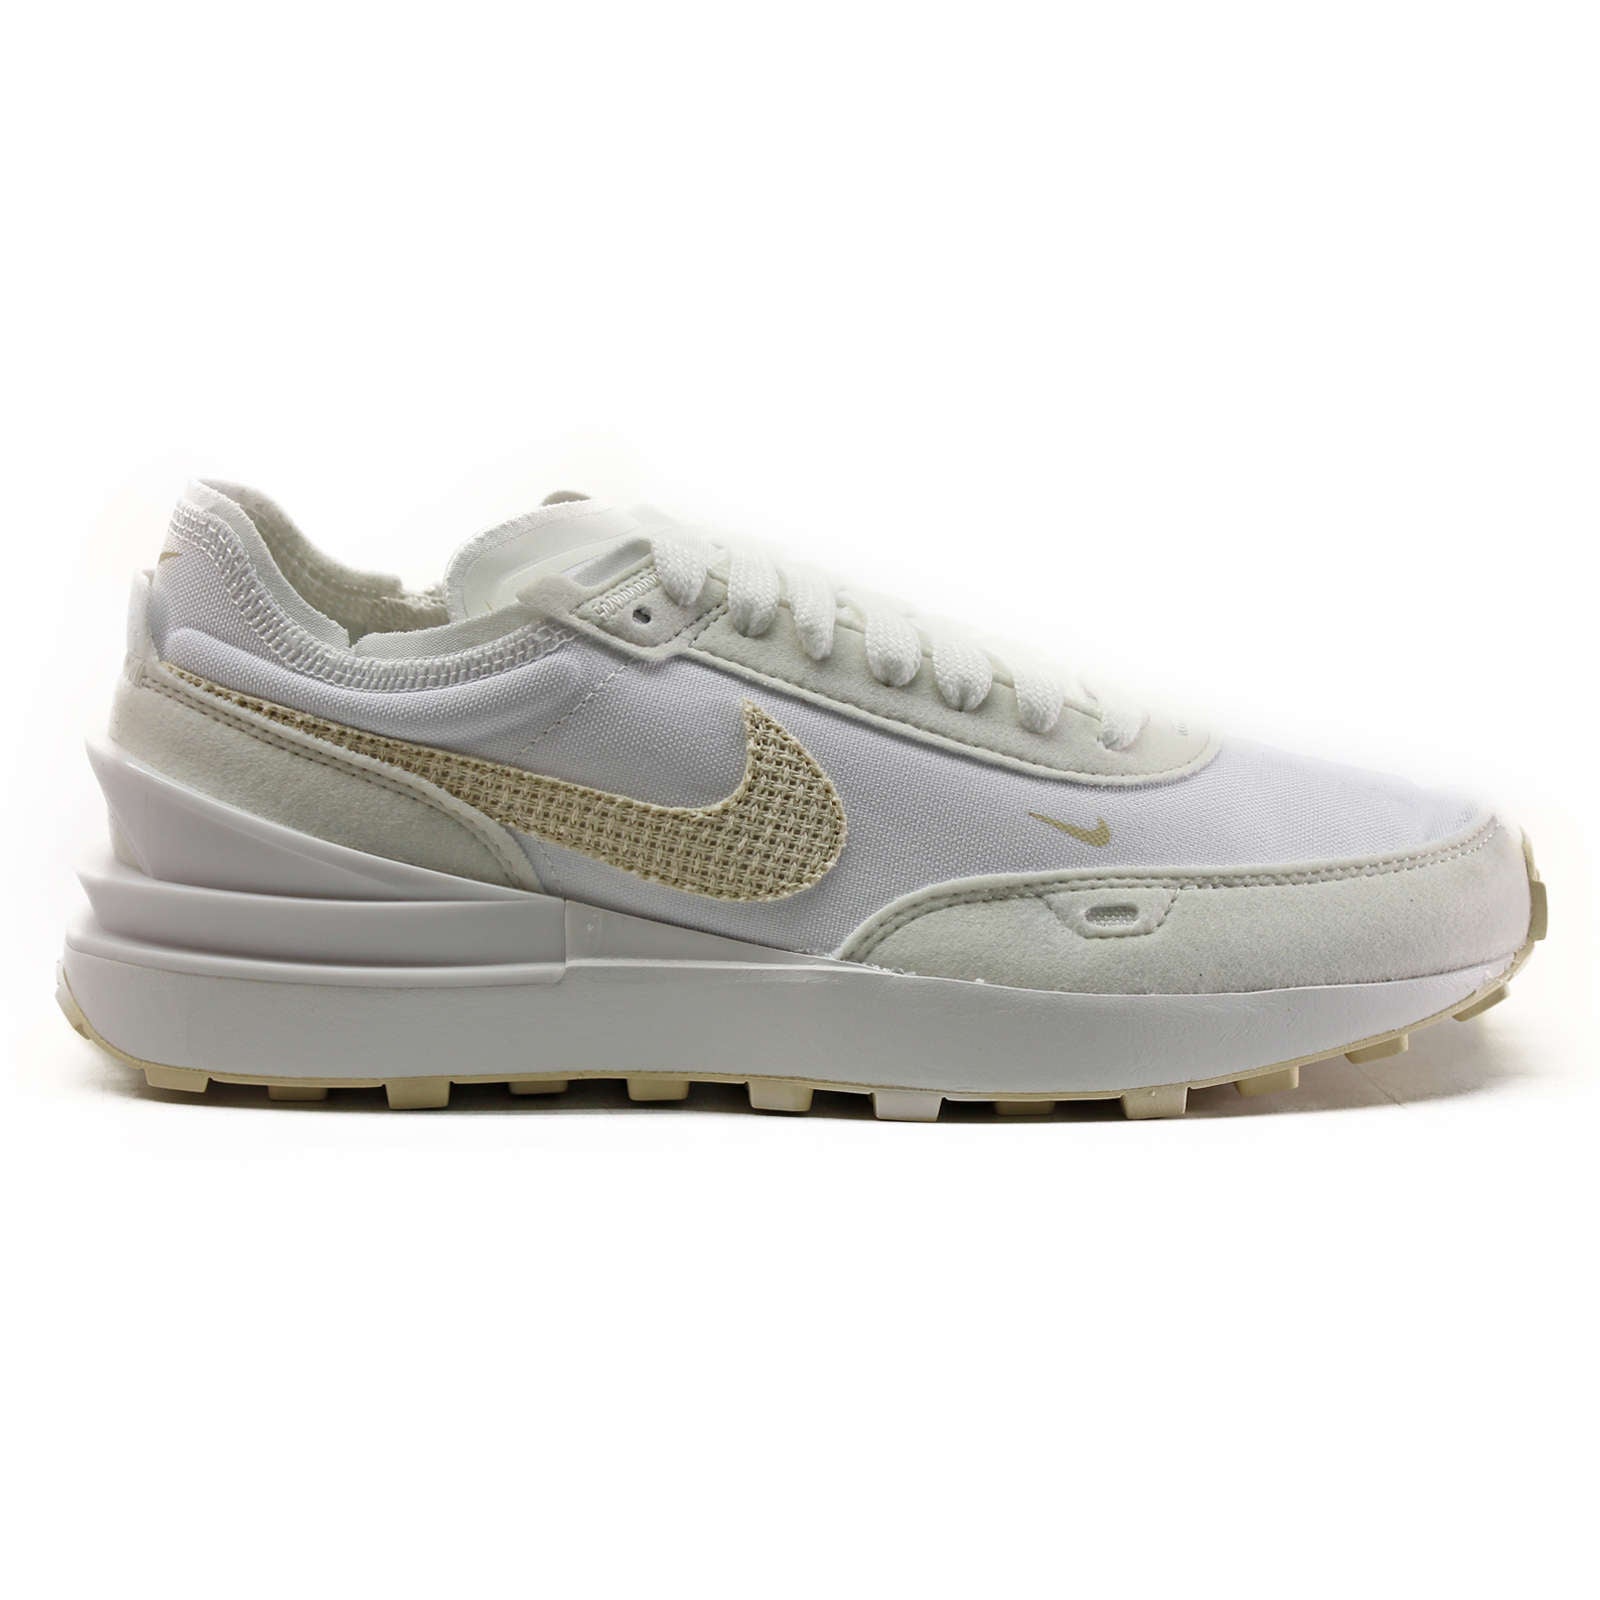 Nike Waffle One ESS Leather Textile Women's Low-Top Trainers#color_summit white fossil